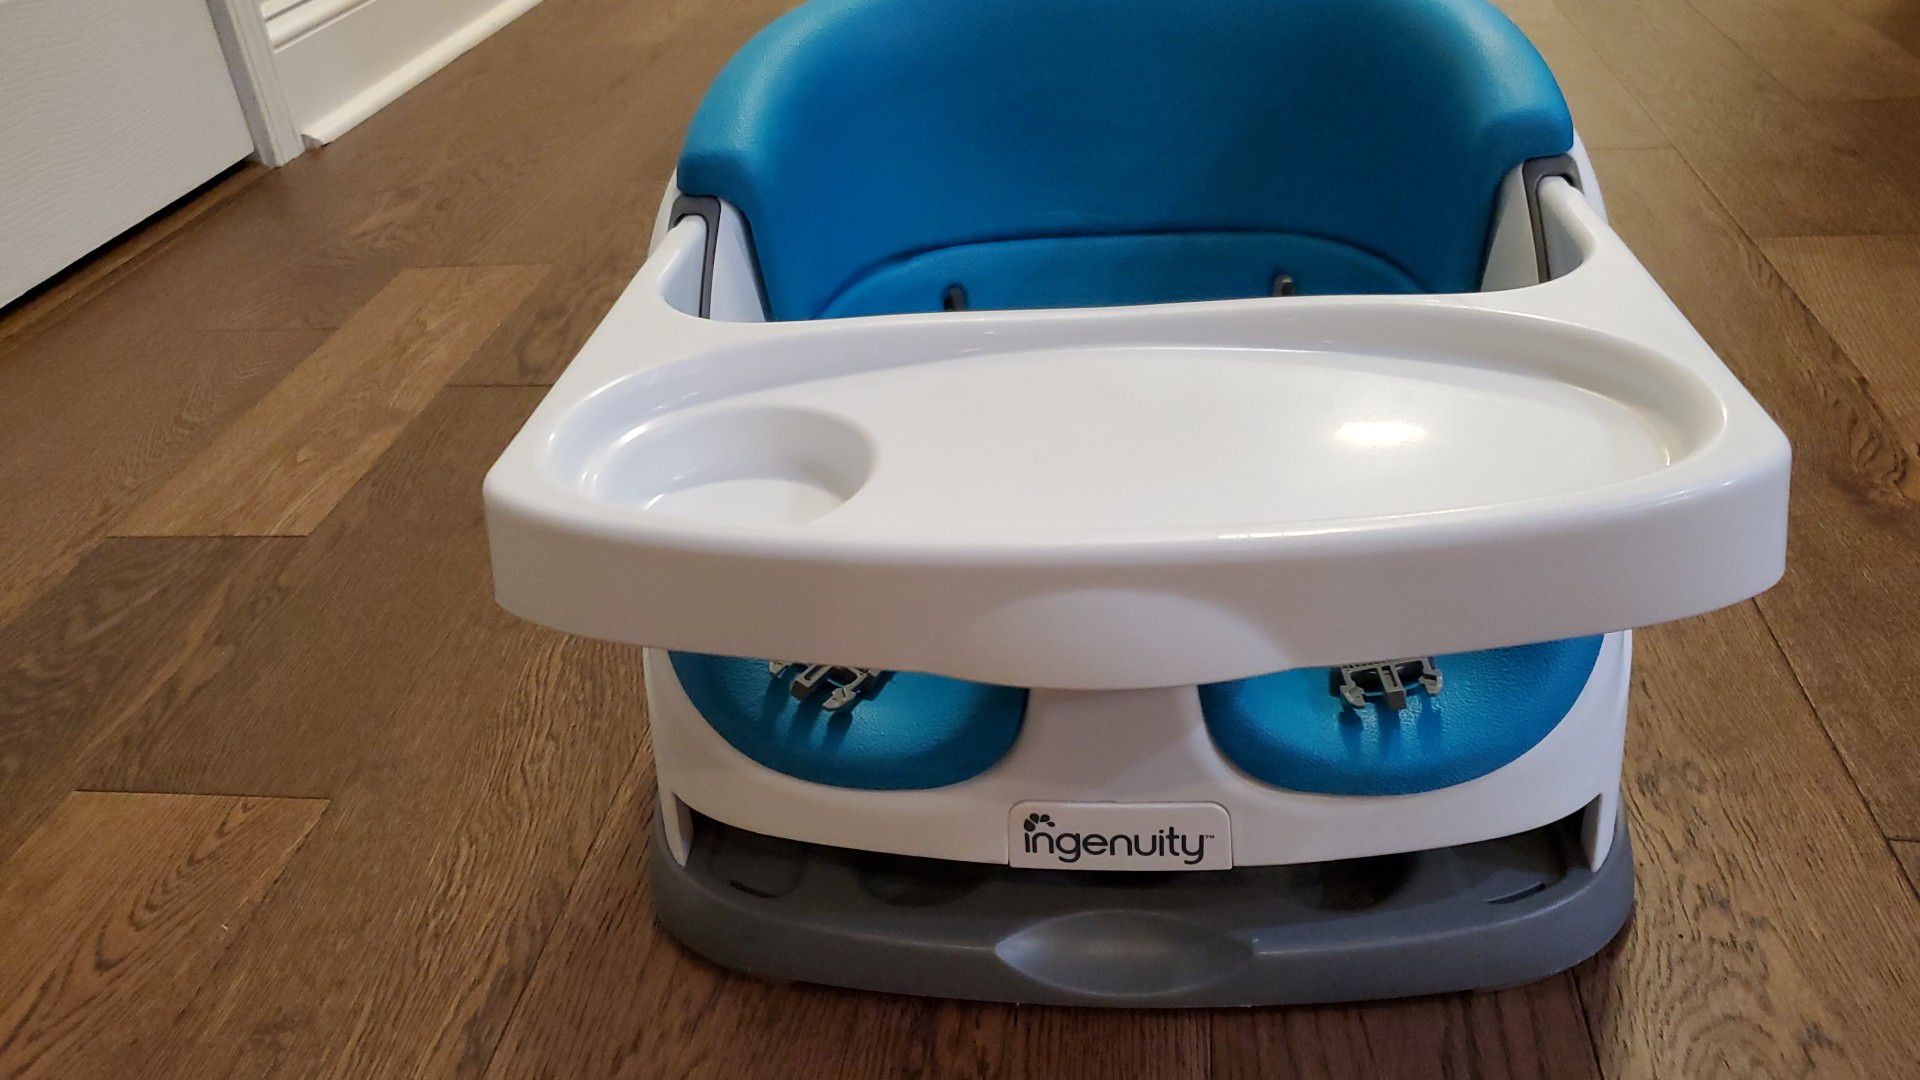 INGENUITY Booster Feeding Seat PERFECT CONDITION SUPER CLEAN, Retails for $39.00 ON Amazon